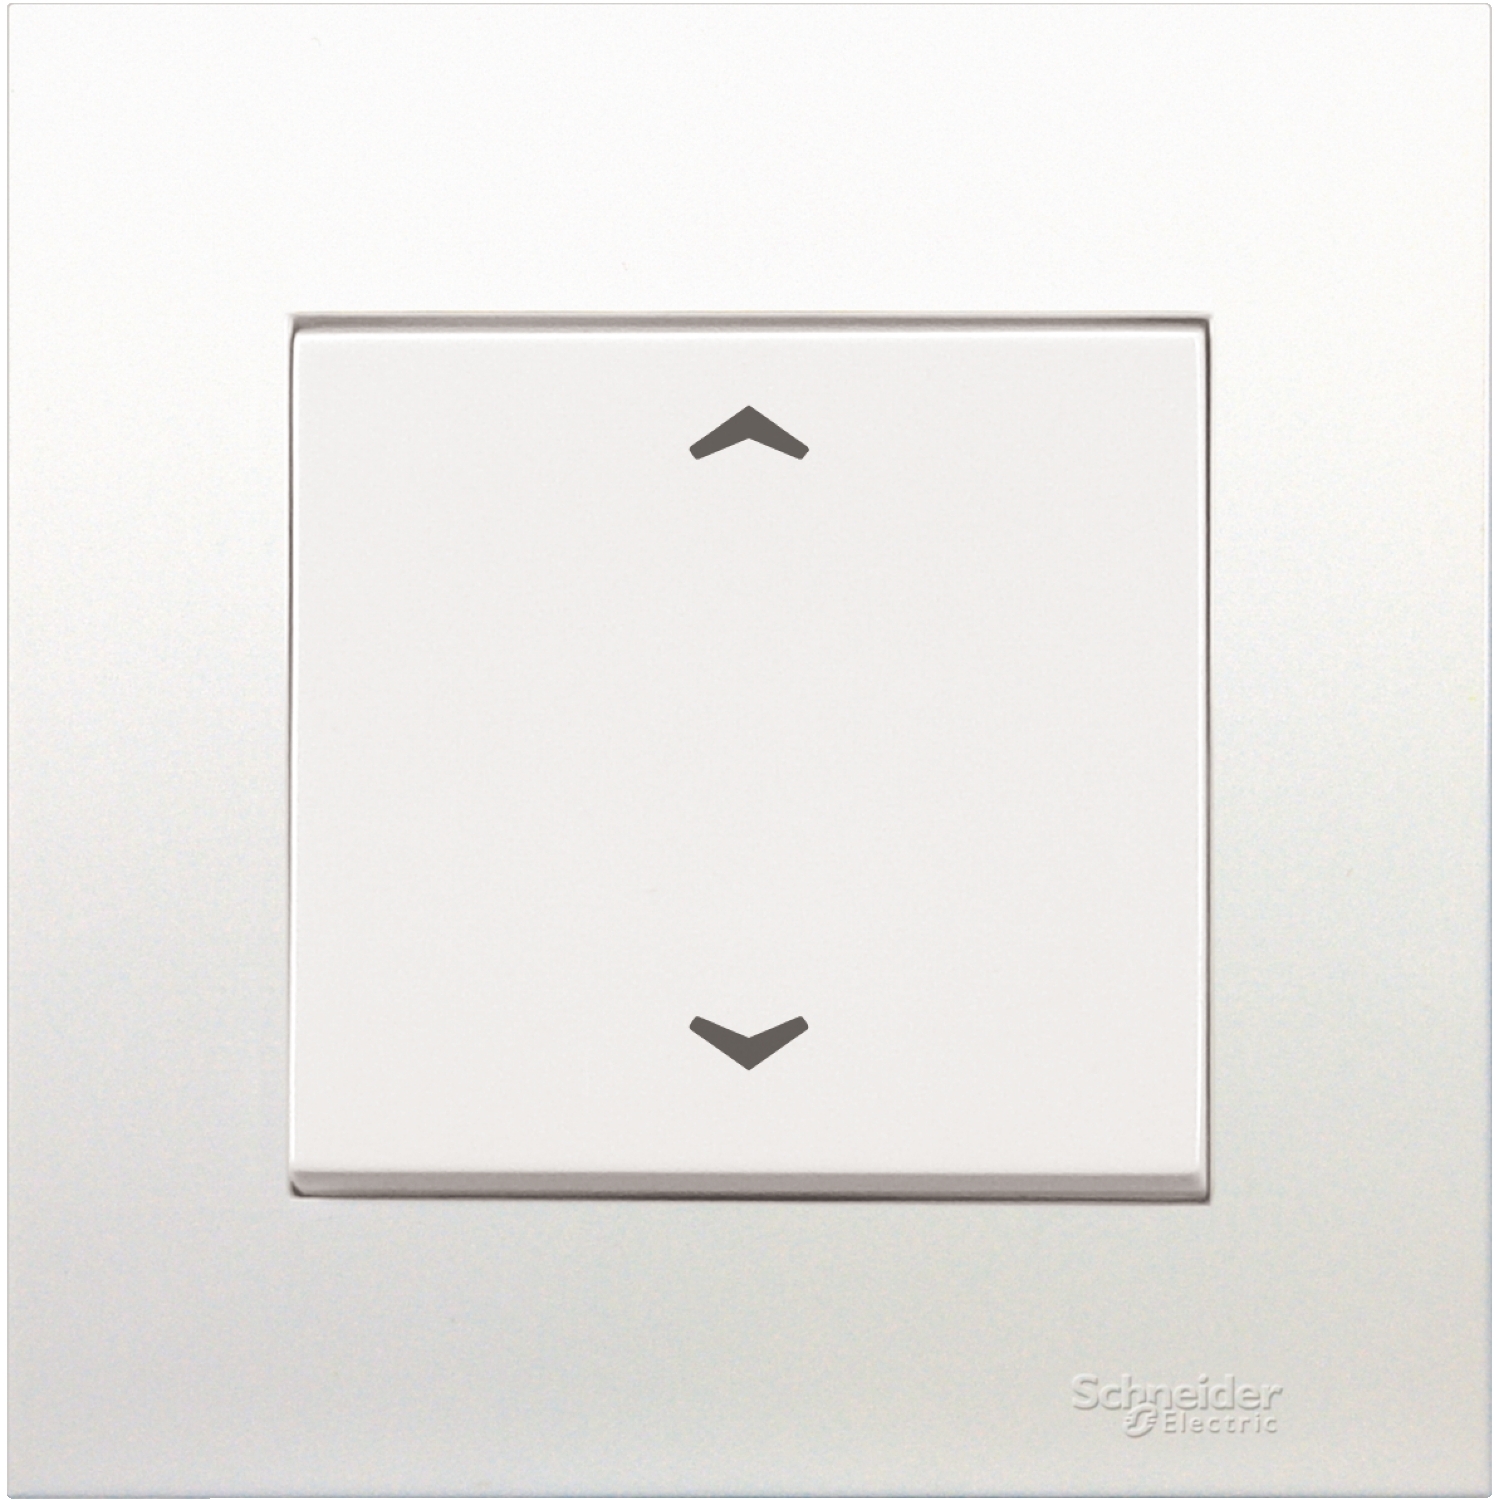 4A 2 Way Centre off retractive Switch